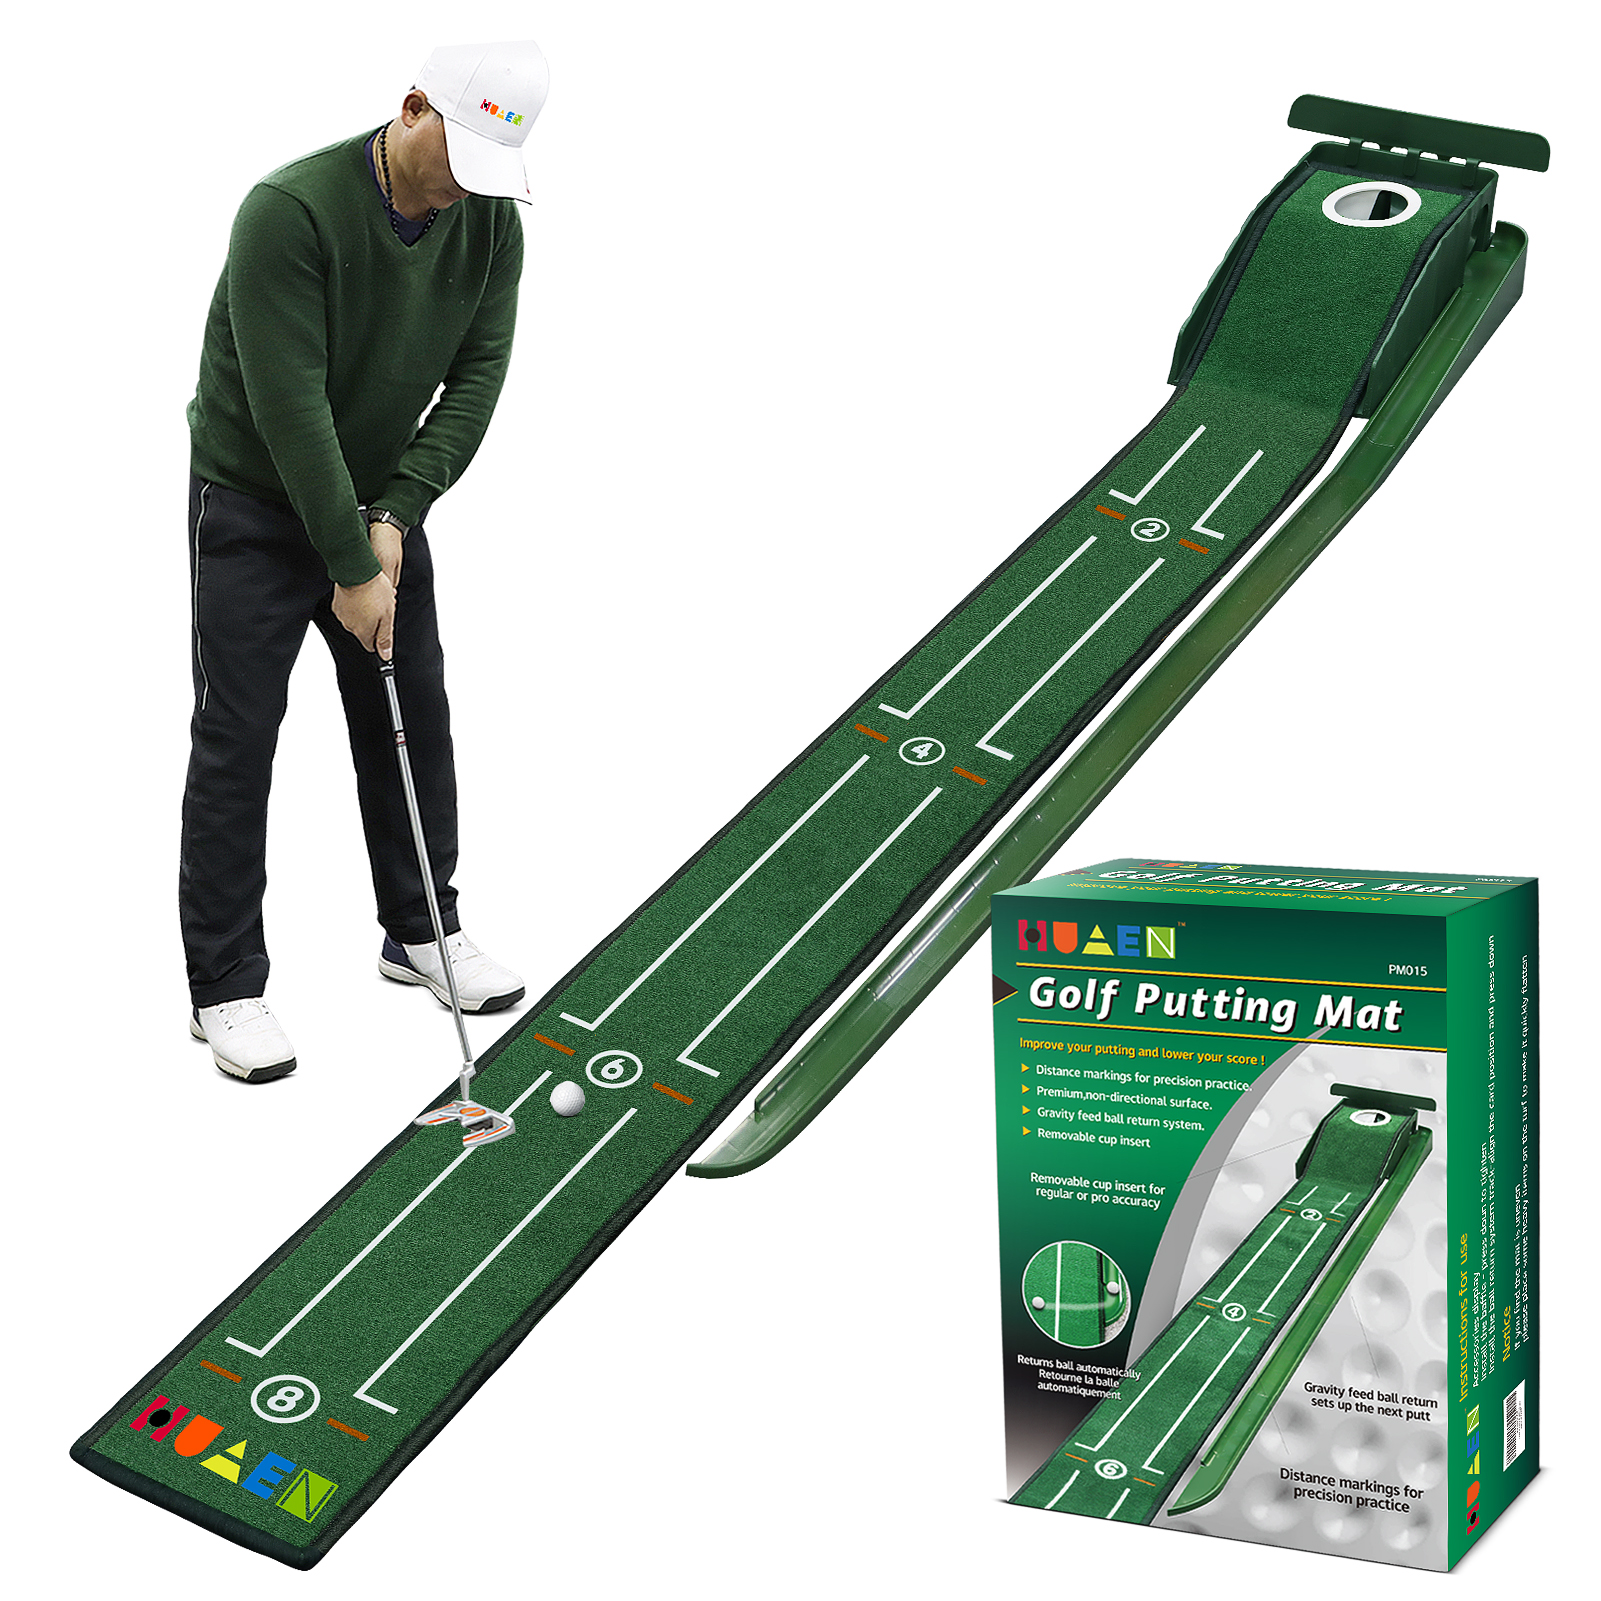  All Turf Mats Super Tee Golf Mat -This Super Tee 5 x 10 Golf  Mat for Indoor or Outdoor Practice That Holds Any Size Wooden Tee : Sports  & Outdoors